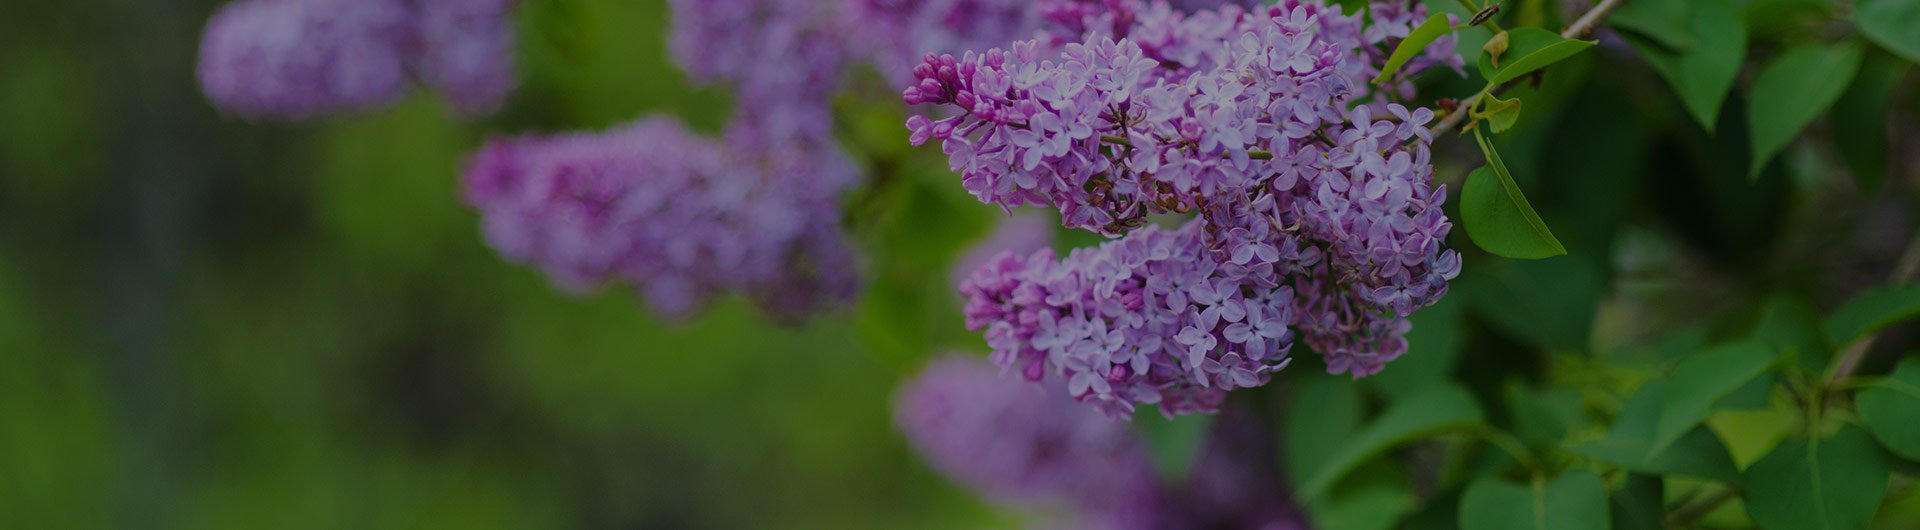 Purple lilac flowers, New Hampshire's state flower.